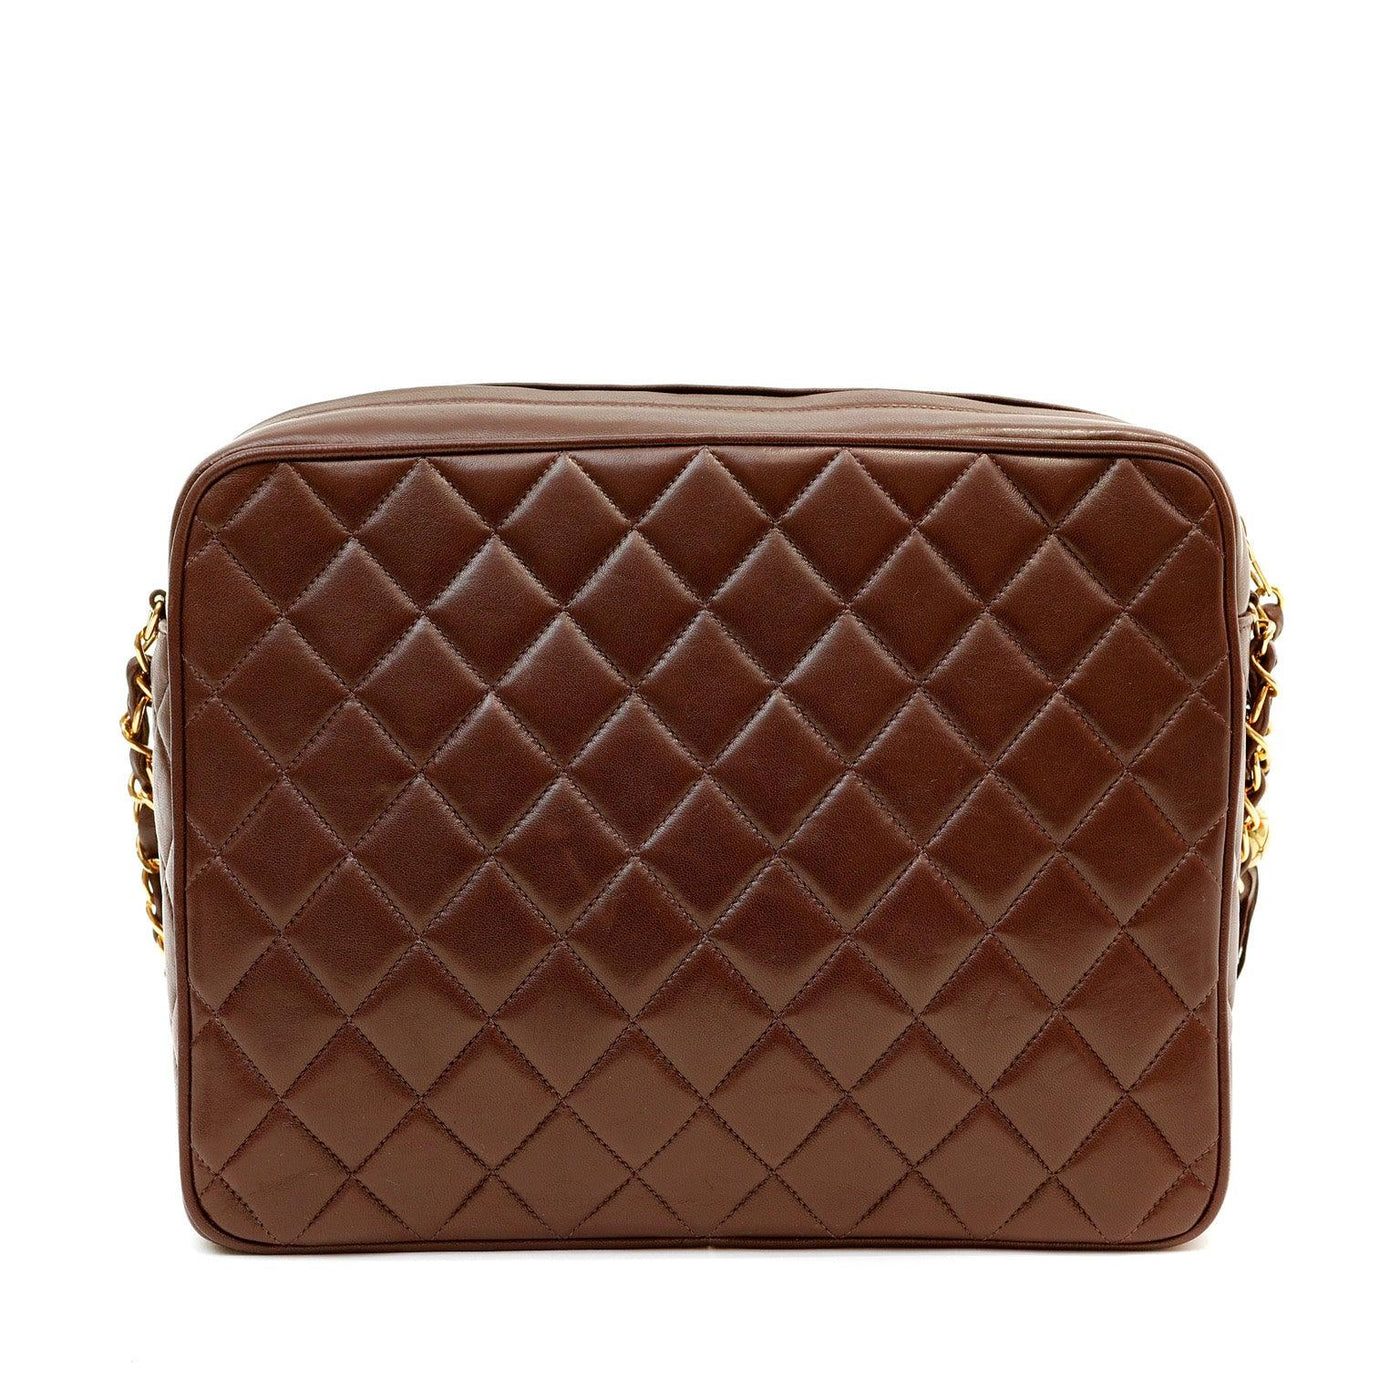 Chanel Brown Lambskin Vintage Camera Bag - Only Authentics